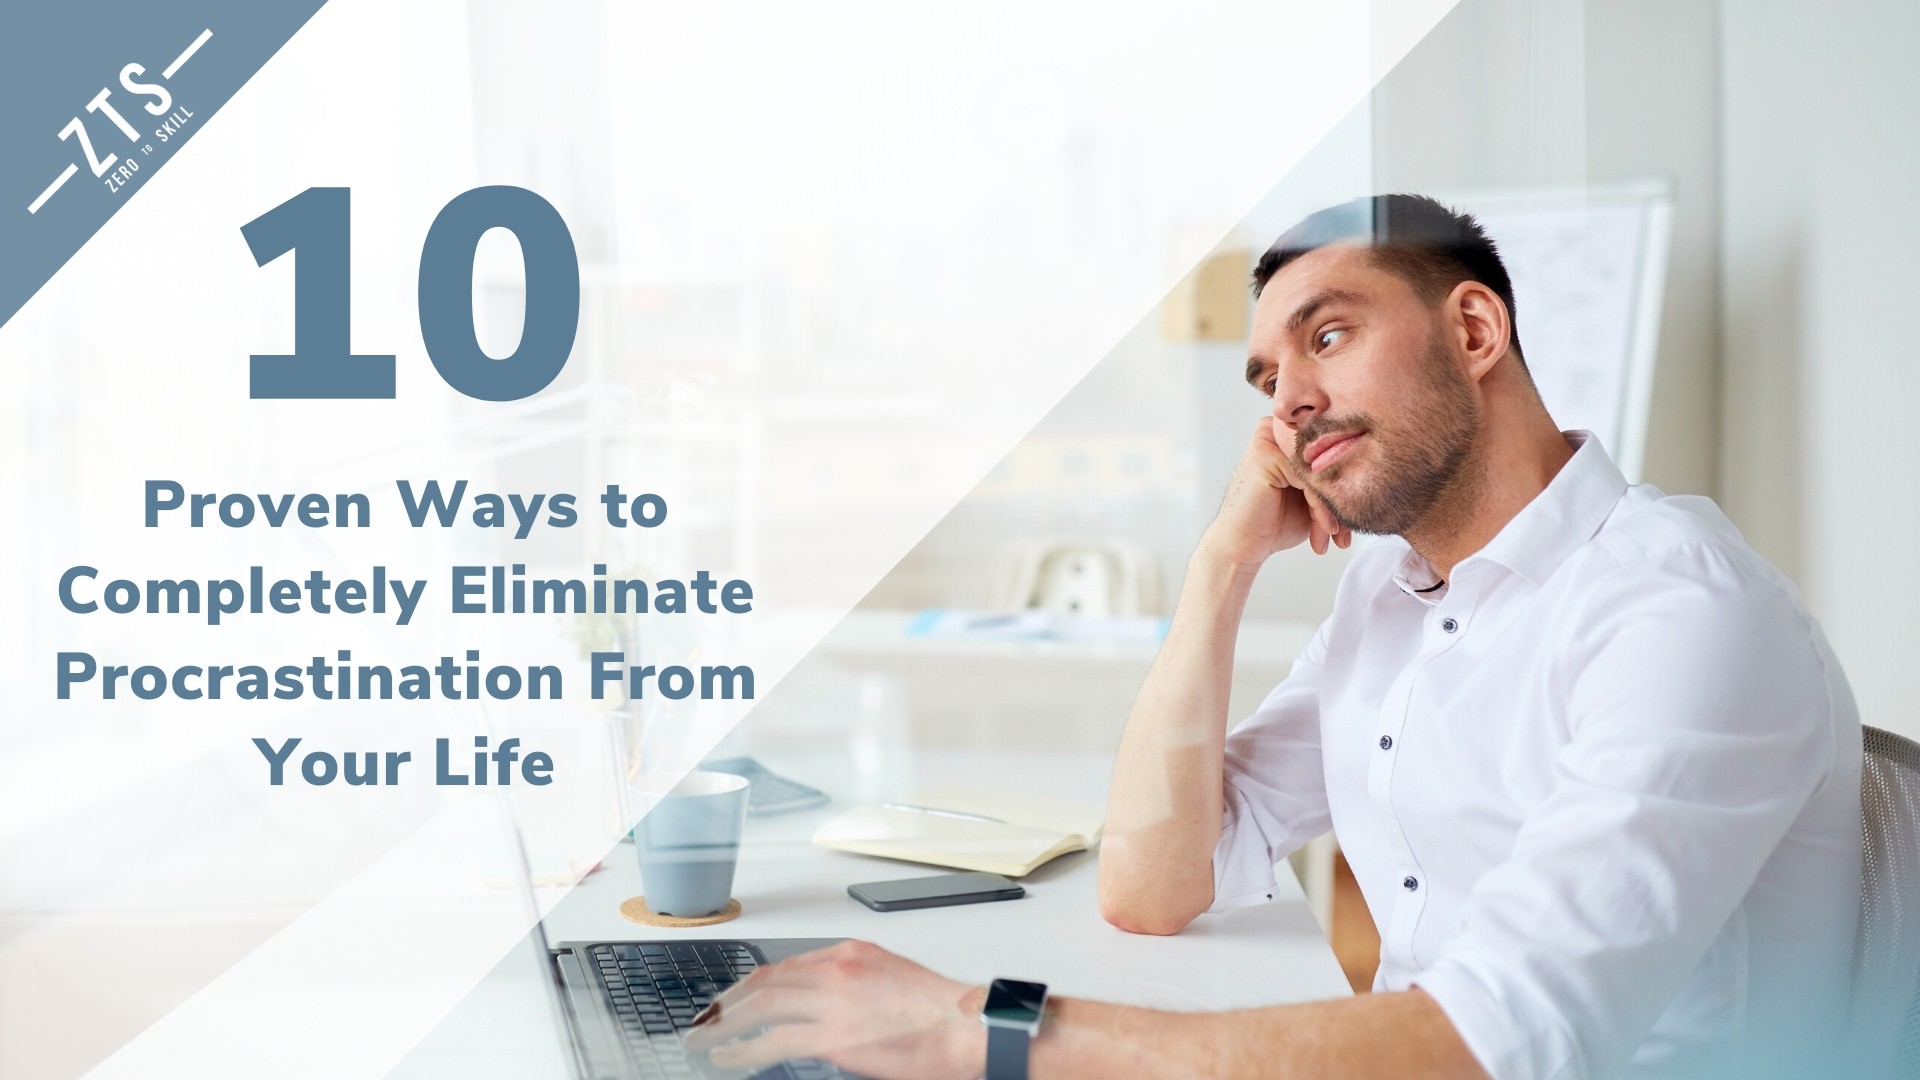 10 Proven Ways to Completely Eliminate Procrastination From Your Life